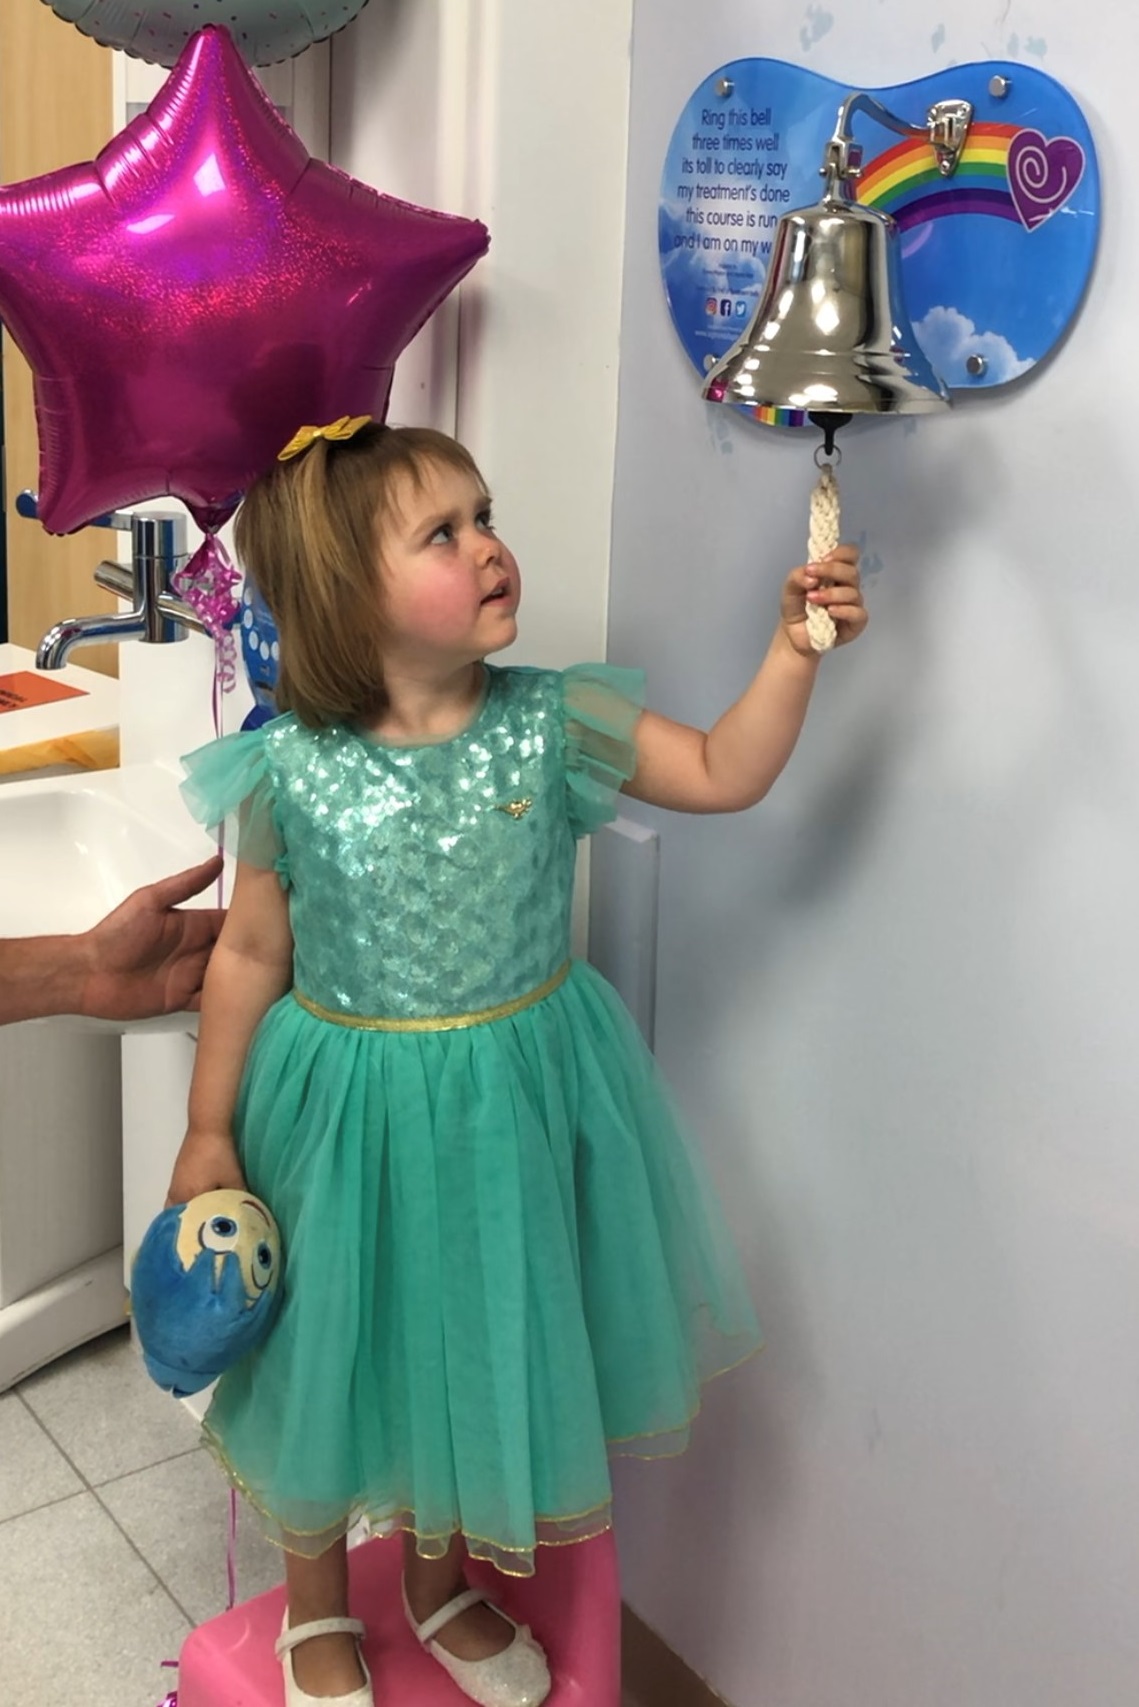 Sophia rings a silver bell that's mounted on a wall